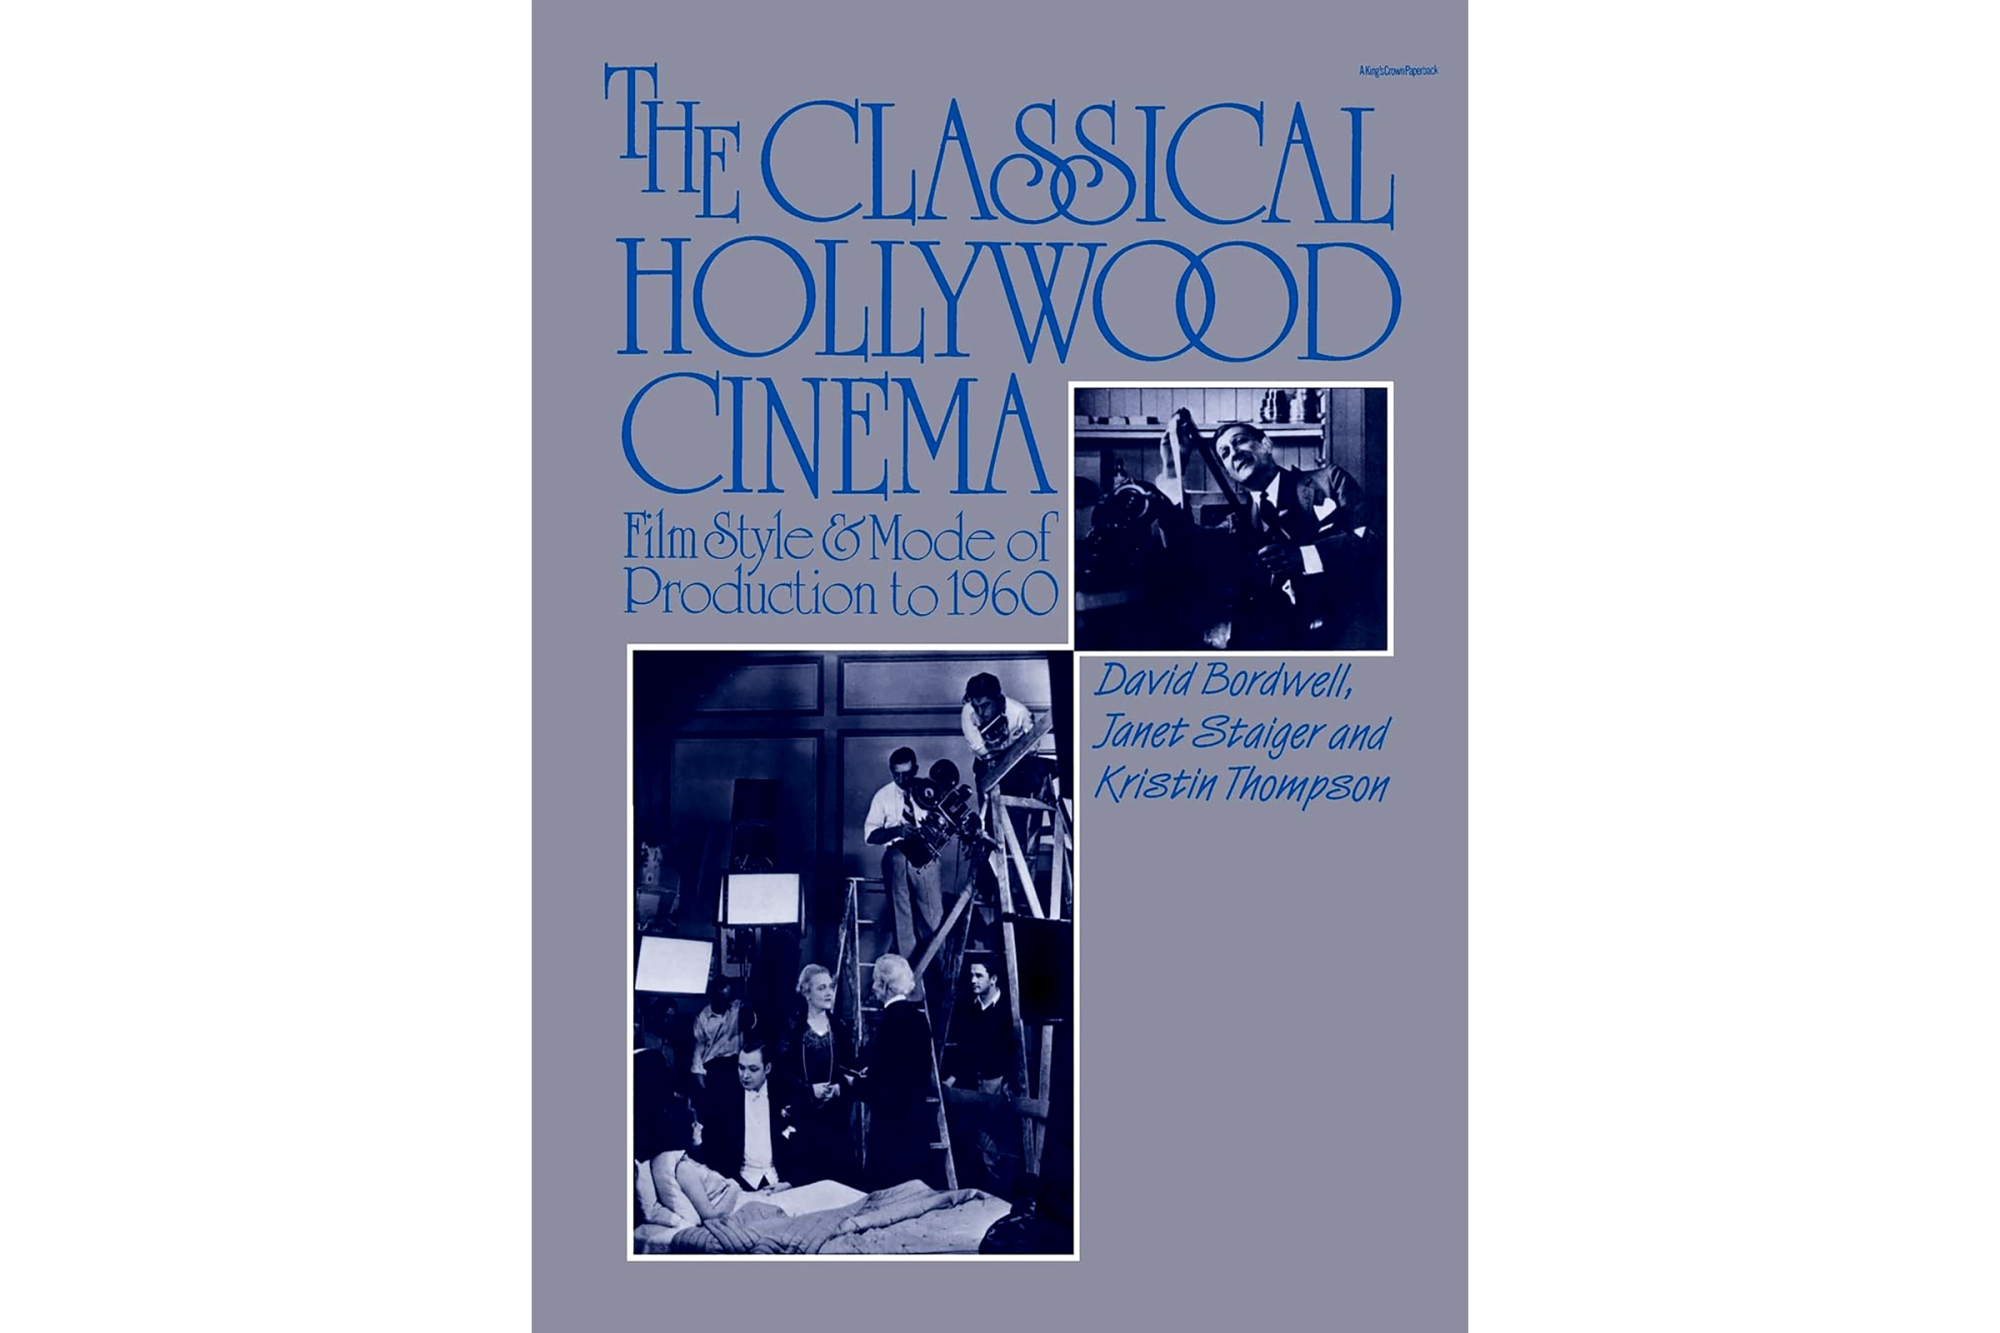 "The Classical Hollywood Cinema" by David Bordwell, Janet Staiger and Kristin Thompson